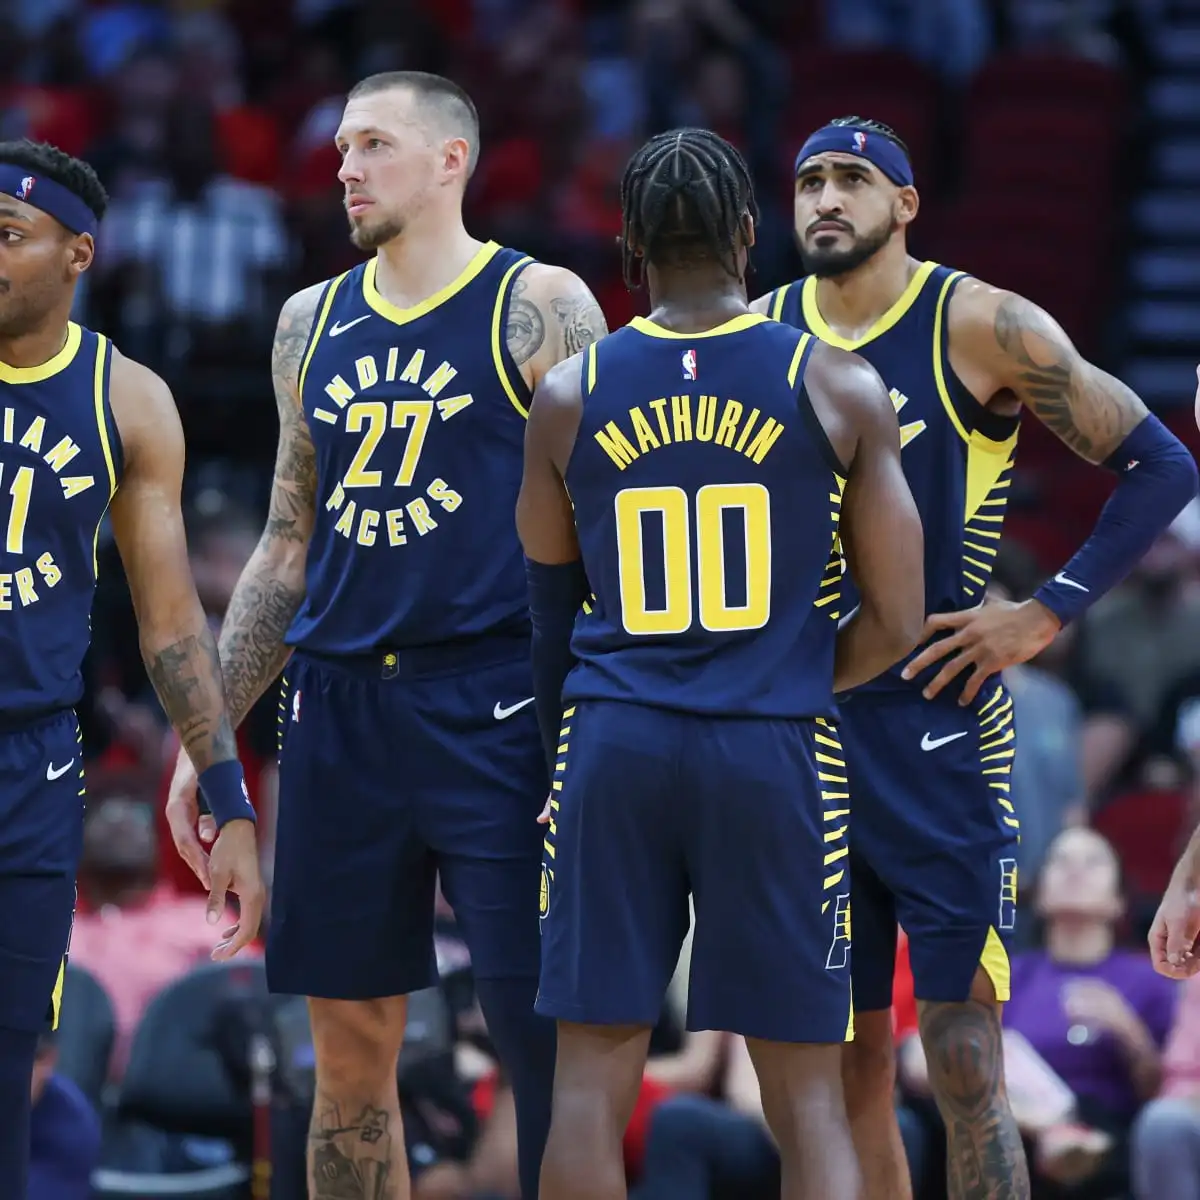 Pacers Head Coach Rick Carlisle reveals Pacers GM got elbowed while the Pacers had a little fracas with Giannis Antetokounmpo and Bucks team over misunderstanding on the match day ball